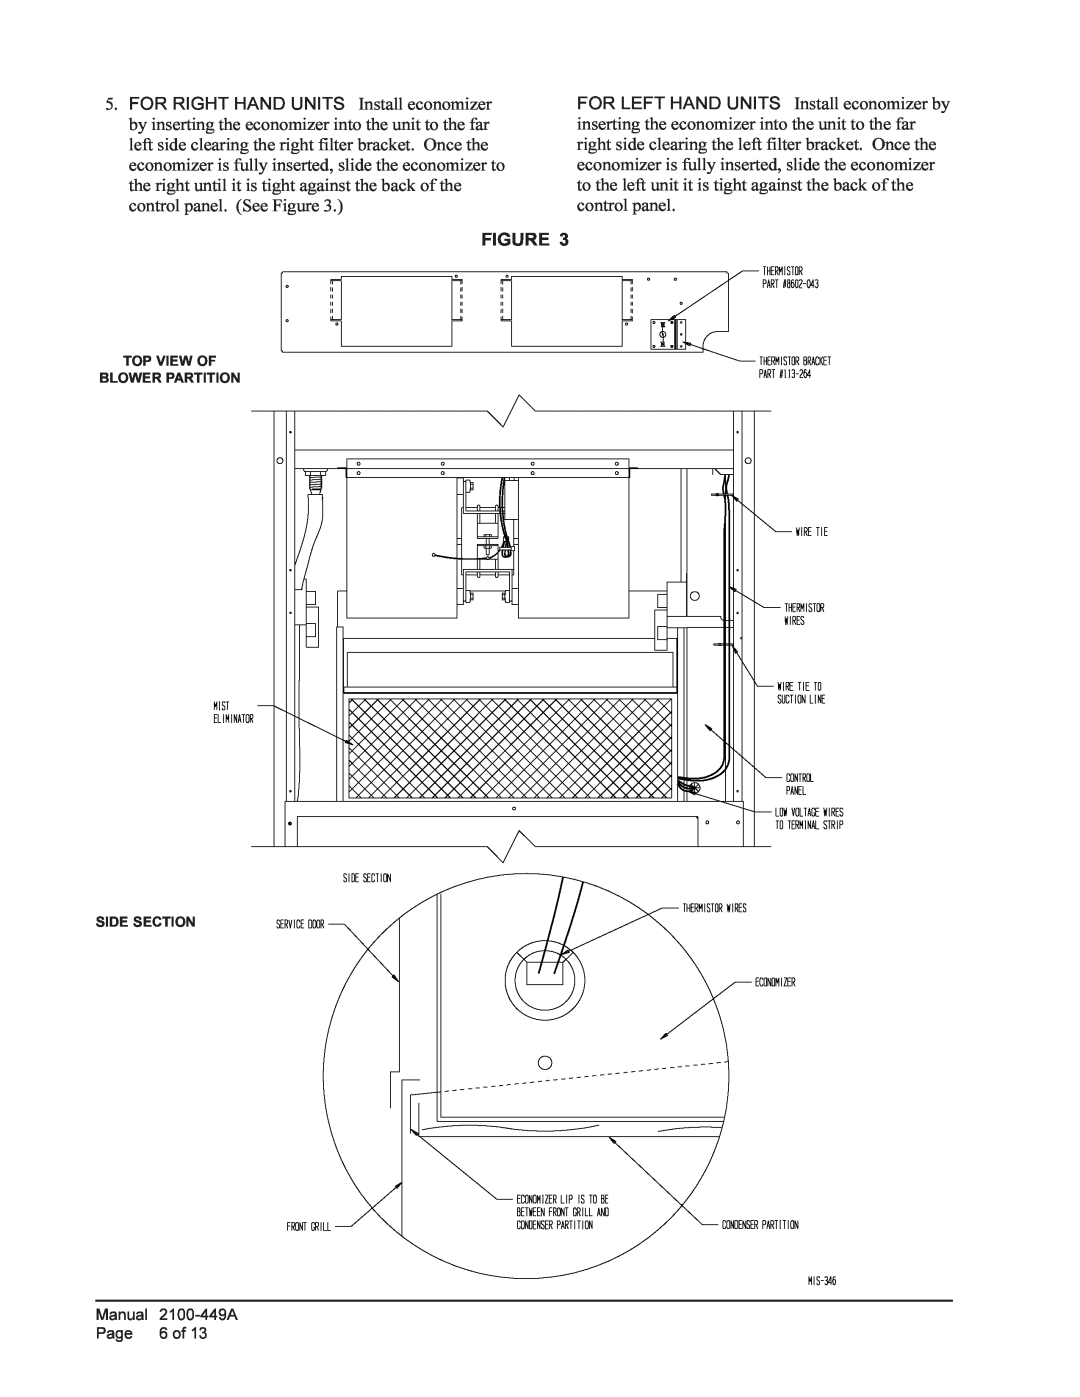 Bard EIFM-3C installation instructions Manual, Page, 6 of, Top View Of Blower Partition Side Section, 2100-449A 